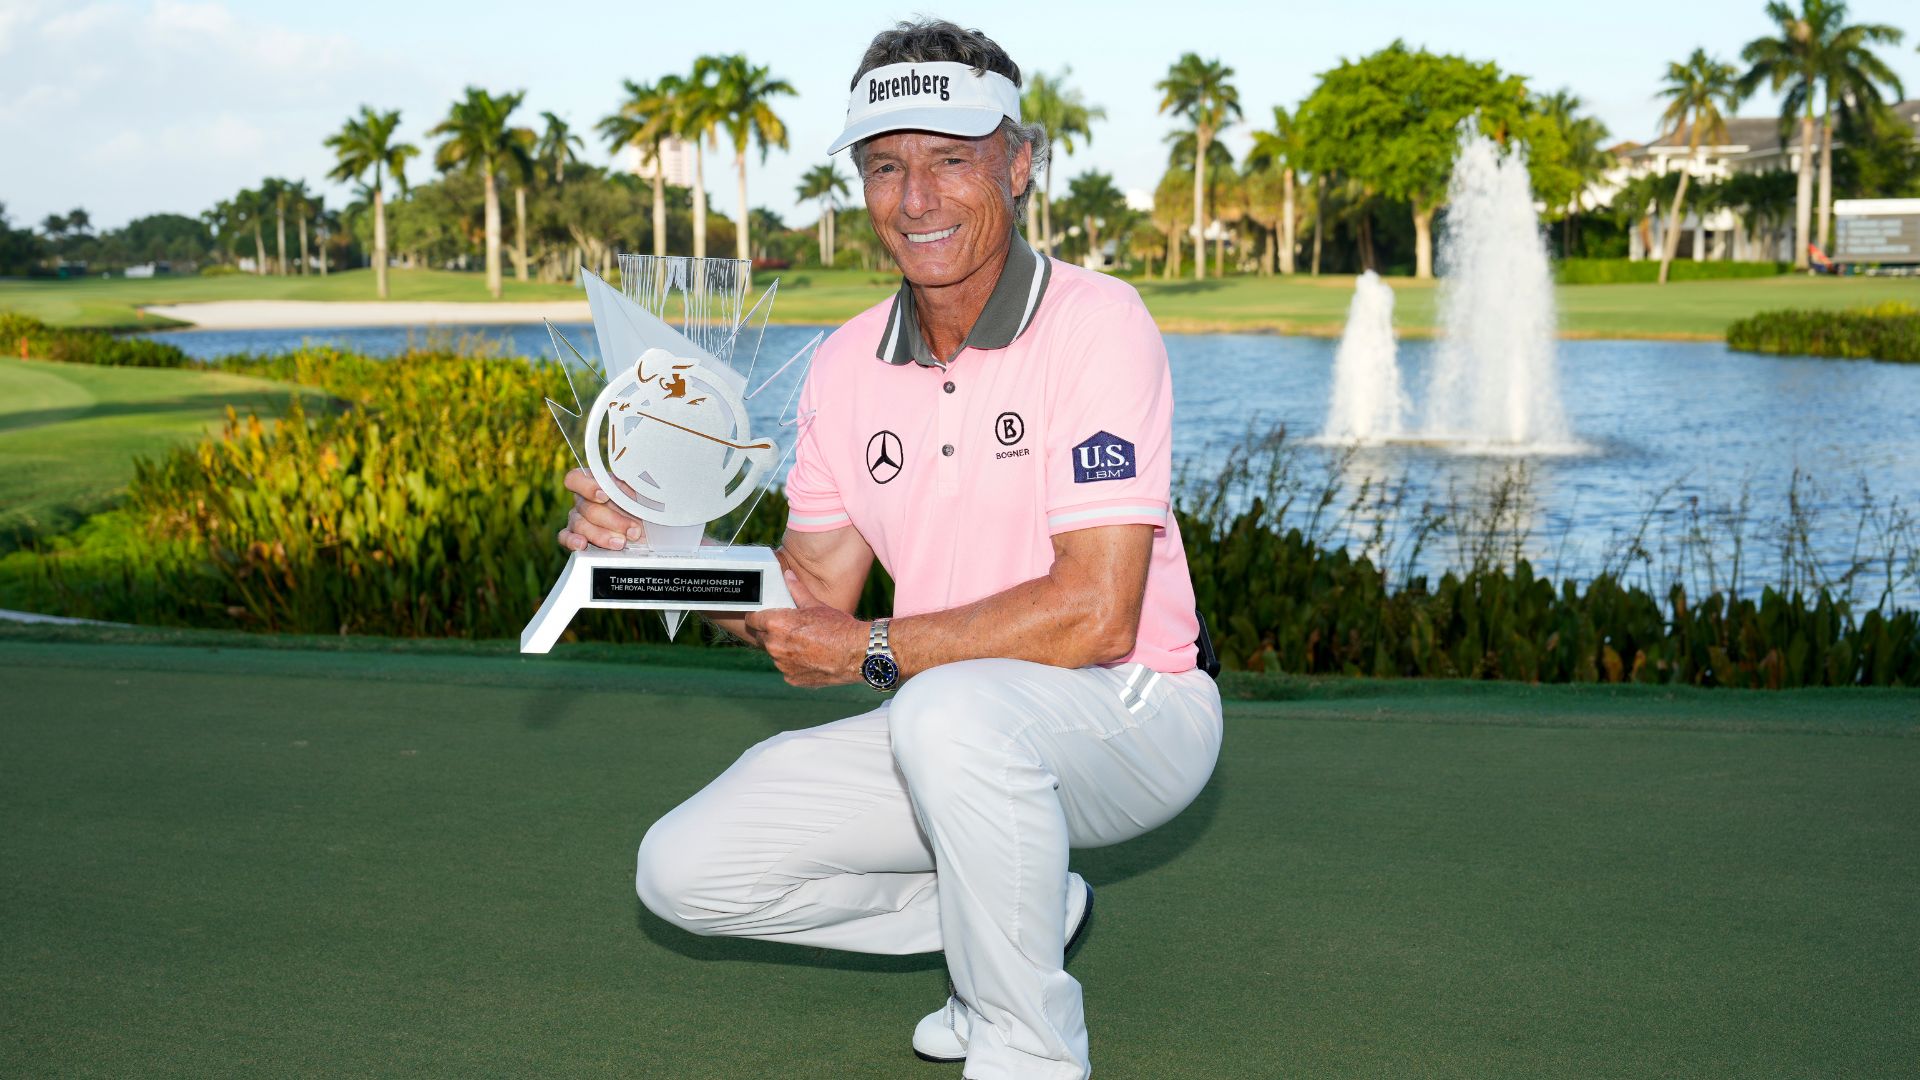 Bernhard Langer wins TimberTech to get within one of Hale Irwin’s all-time PGA Tour Champions’ wins record